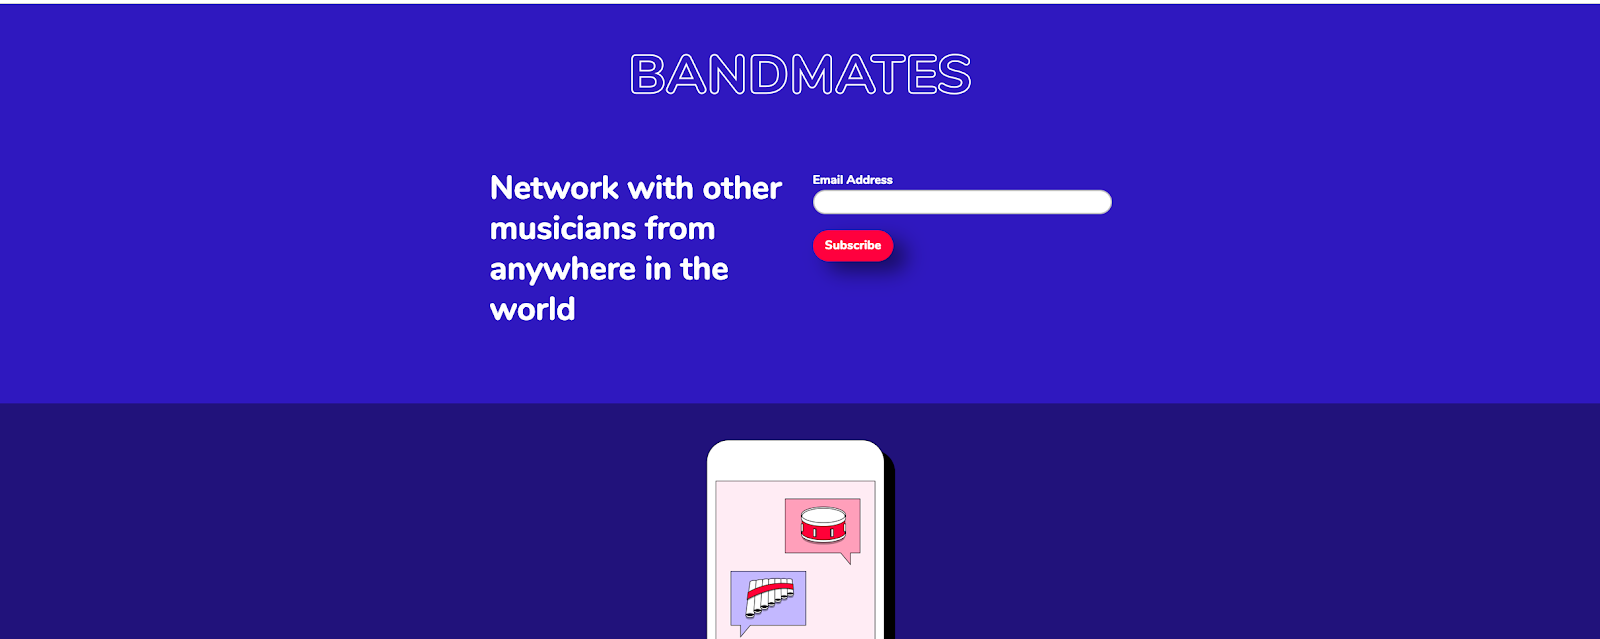 Bandmates Landing Page from Mailchimp